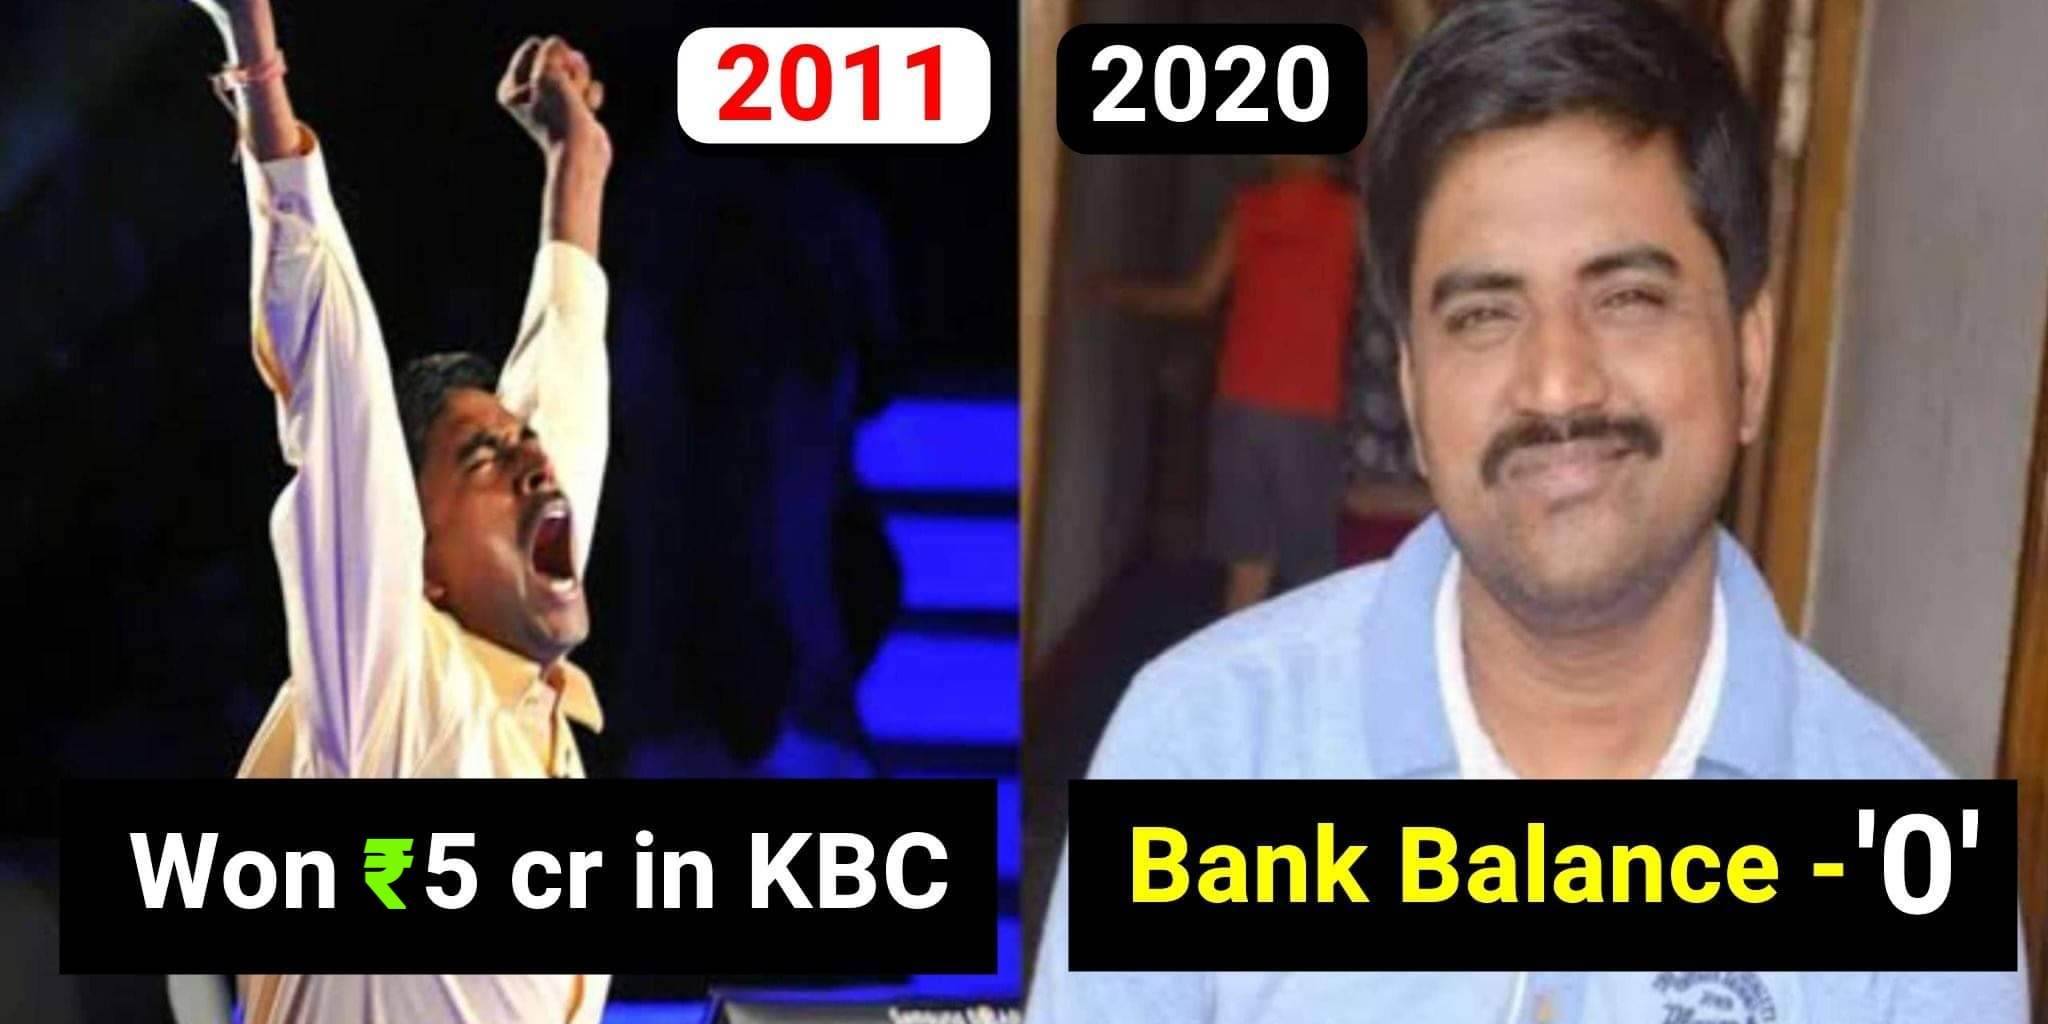 "My wife kicked me out the day my pocket got empty", ₹5cr KBC winner shares his story